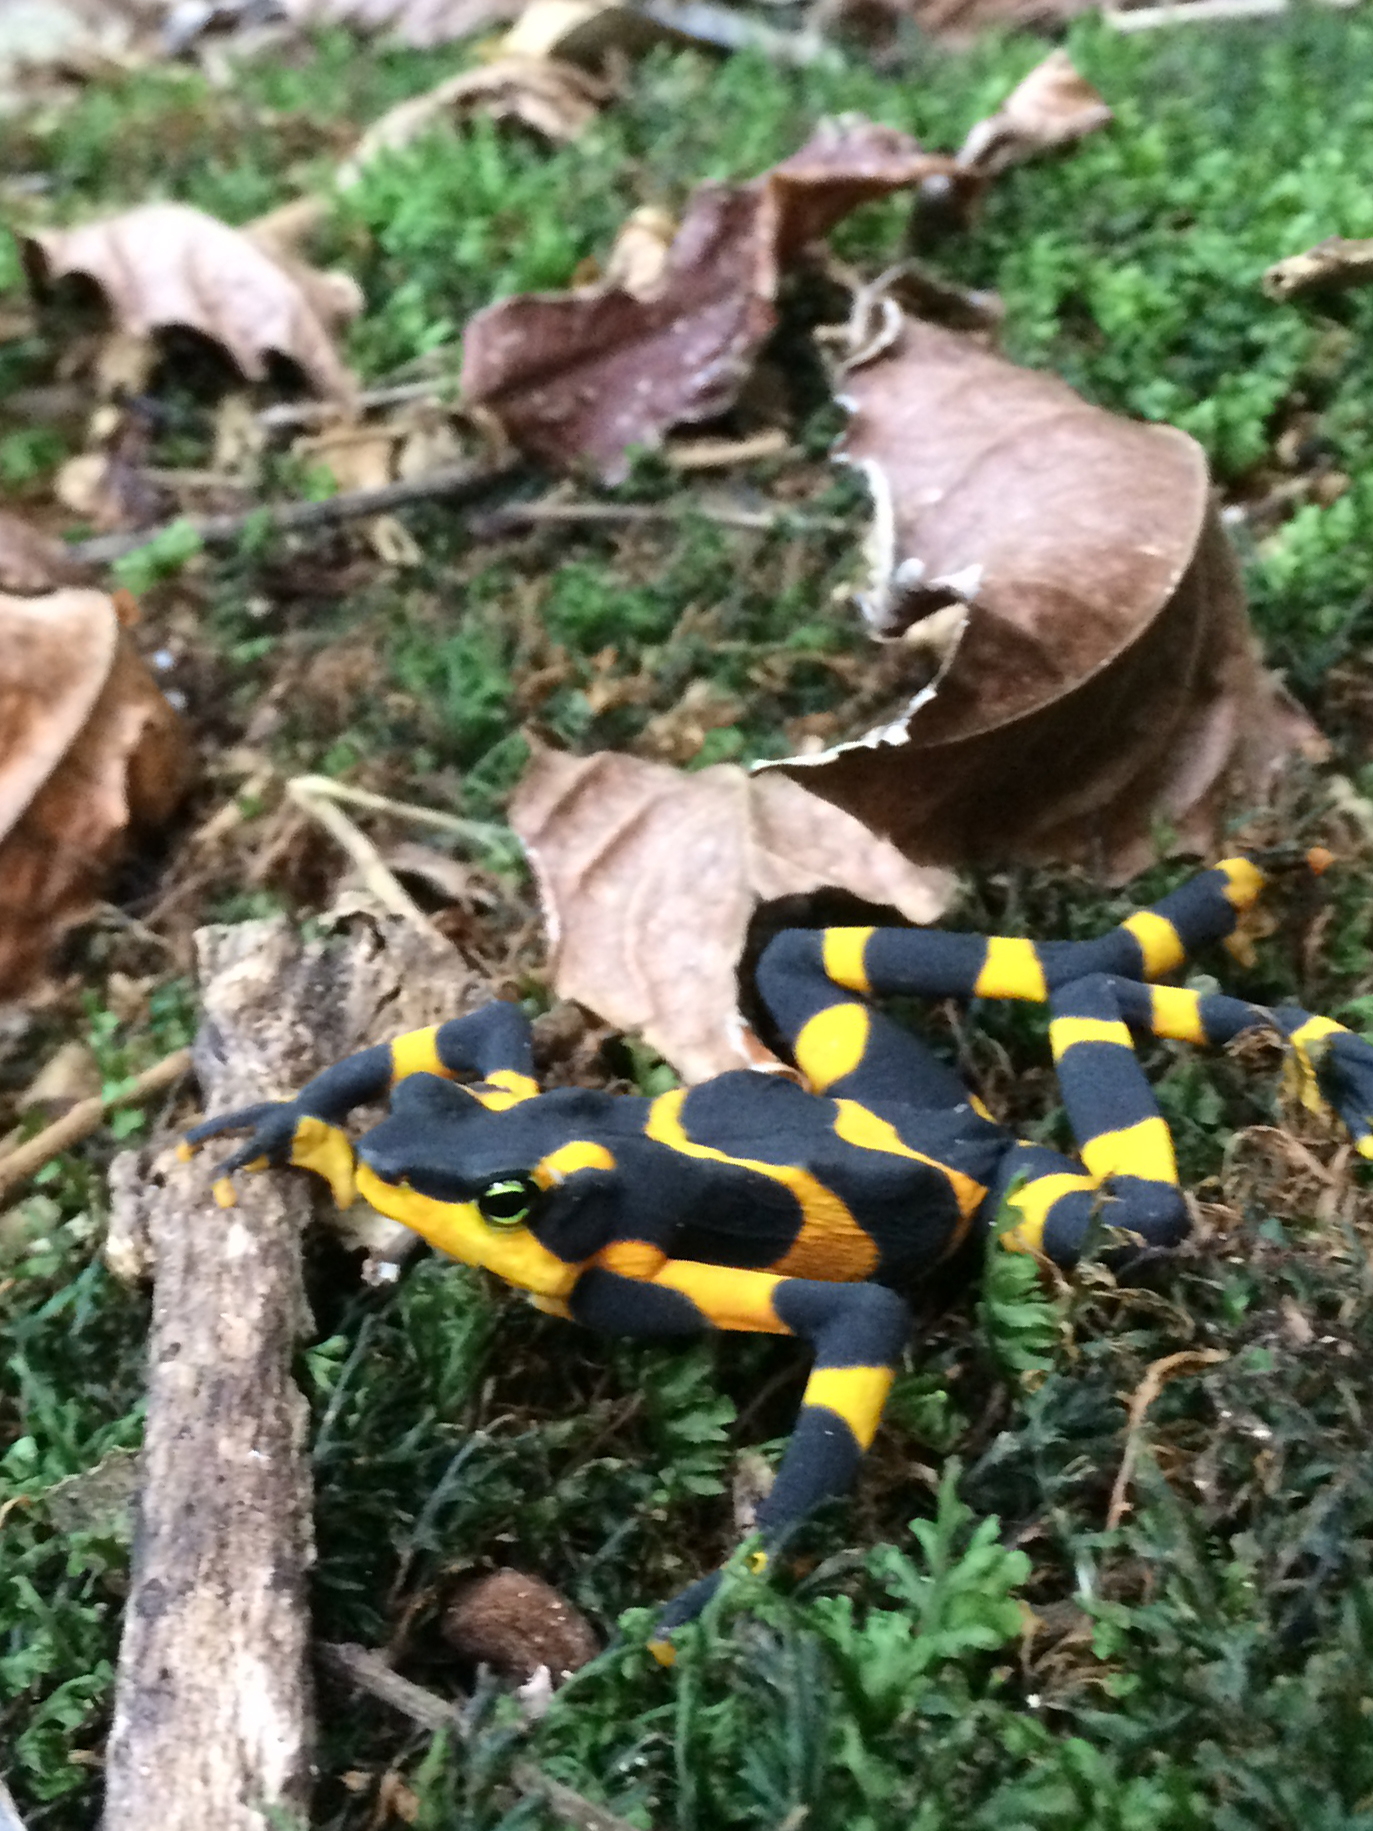 A yellow and black striped frog on leaves.